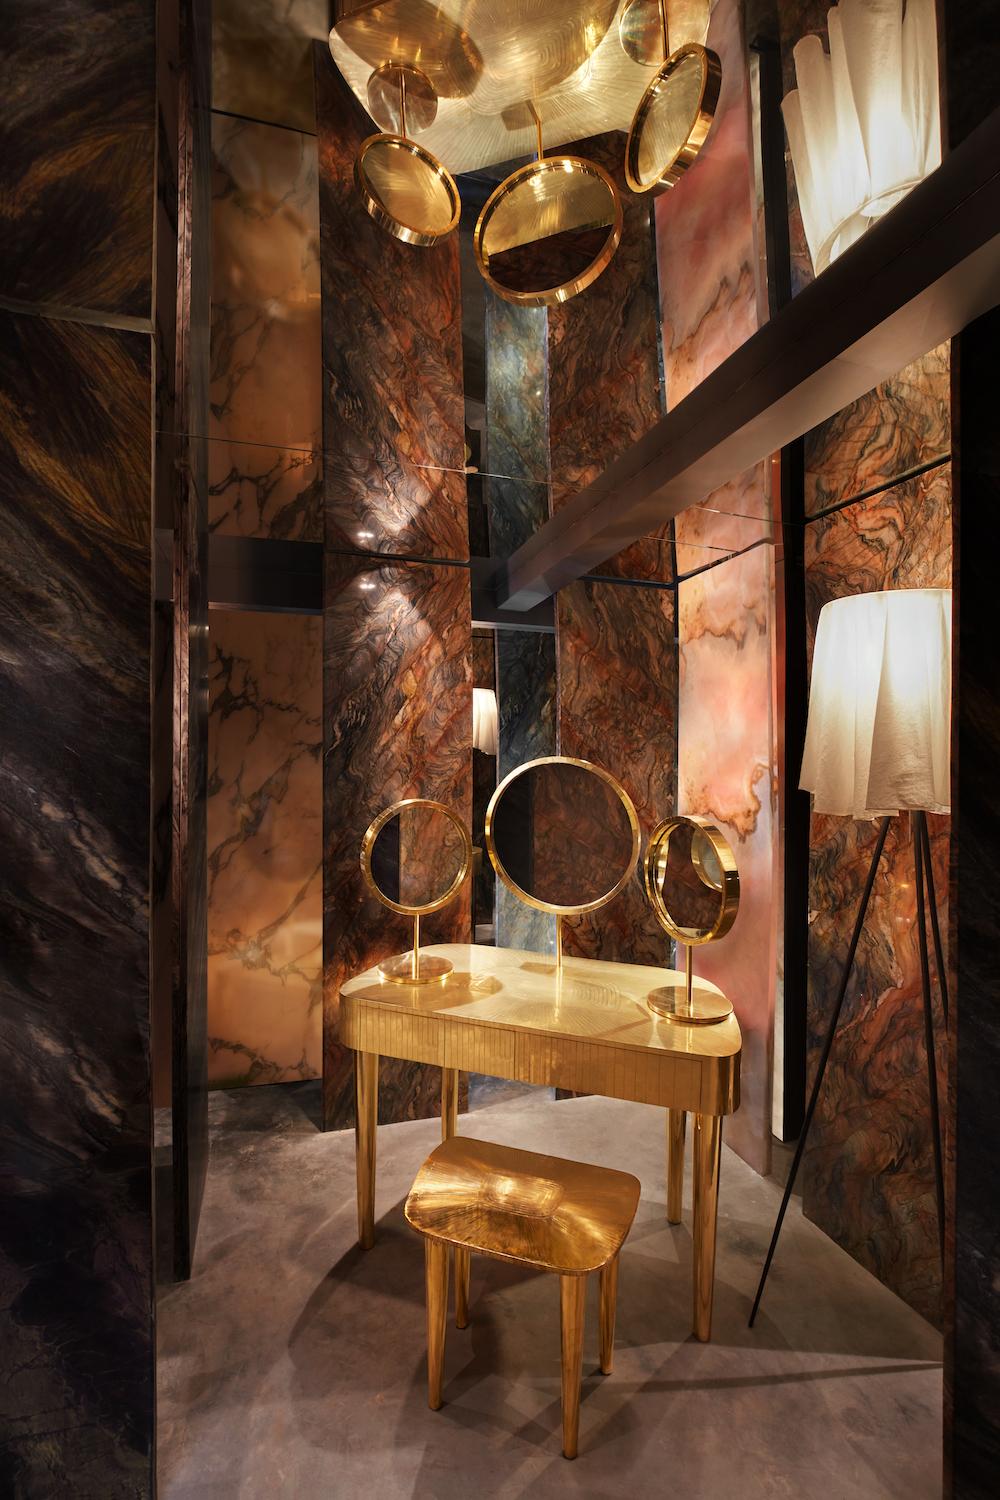 Bijou Marquetry Stool in Brass by Matteo Cibic is an opulent seat with brass inlay. It may be used as a single statement piece or with the stunning woman in Paris Oro dressing table.

Matteo Cibic designed the Vanilla Noir collection for Scarlet